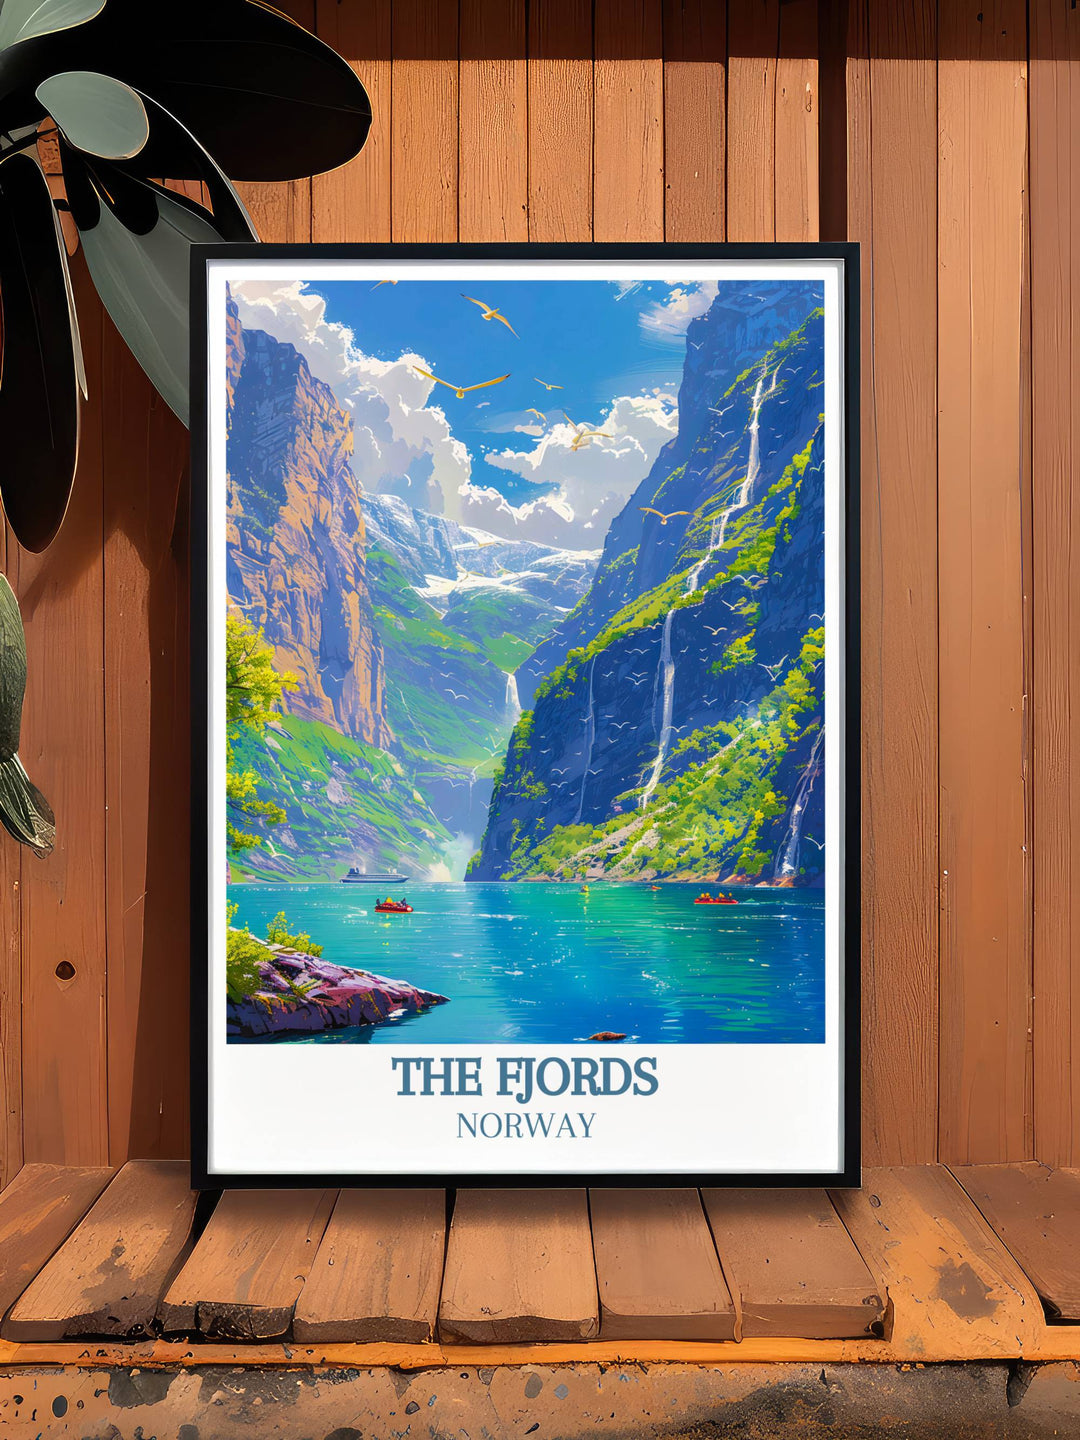 The Fjords Fine Art Prints highlighting the raw beauty and tranquil atmosphere of Norways iconic natural wonders, making them an ideal addition to any art collection for nature enthusiasts.